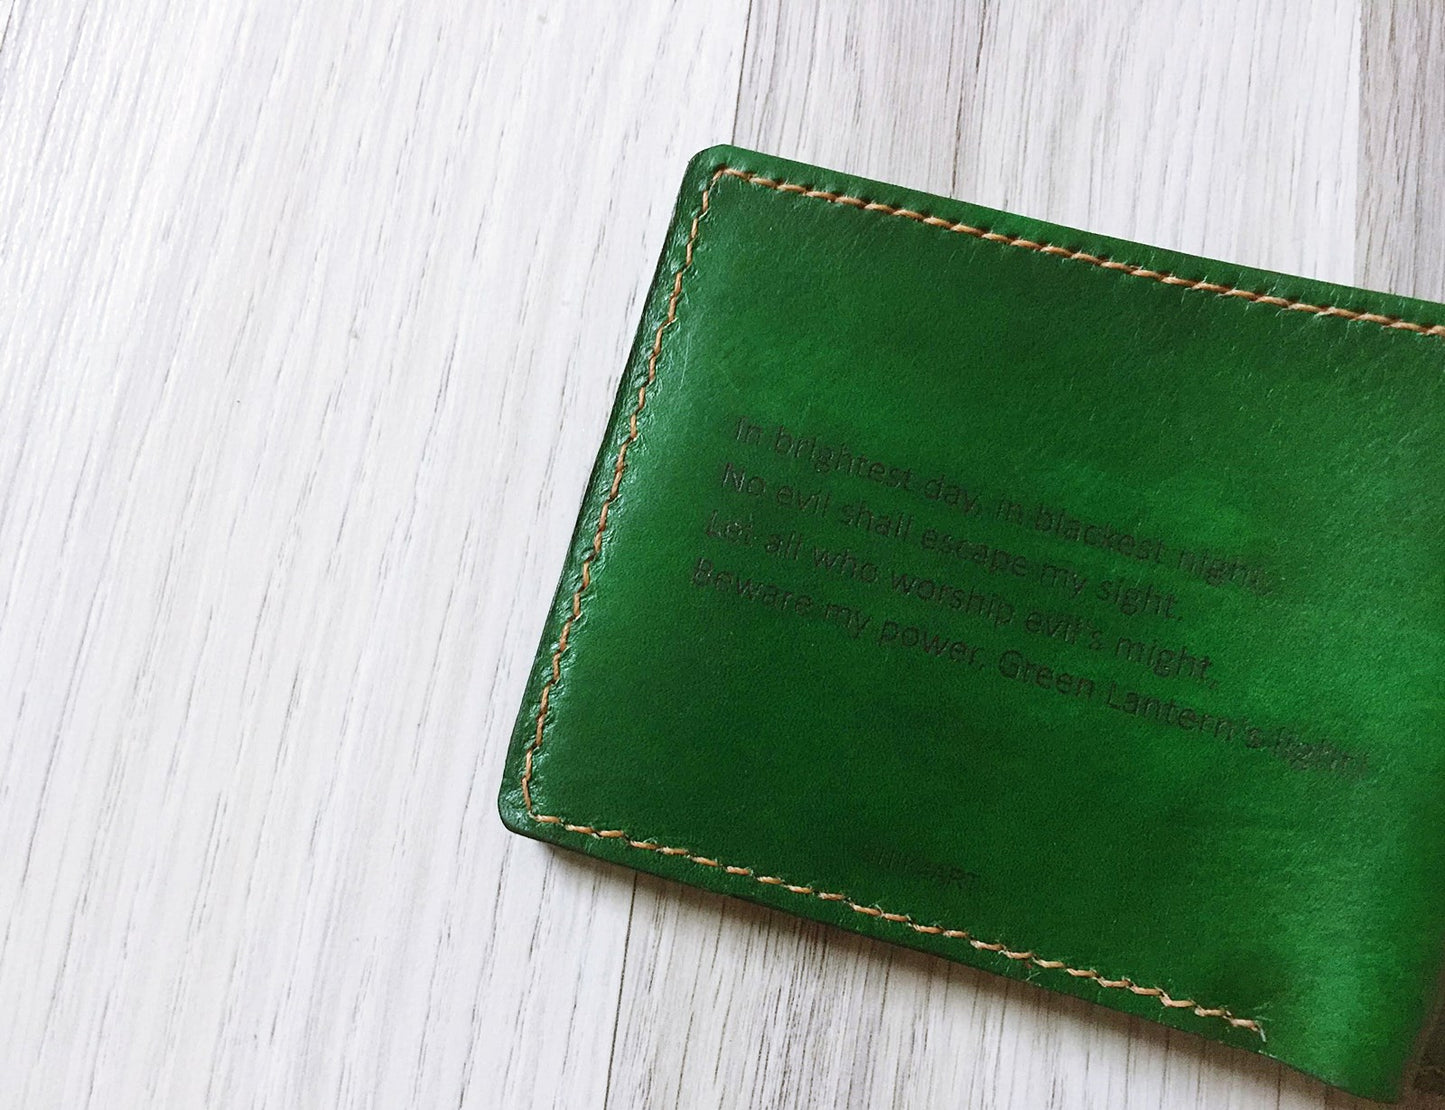 Mayan Corner - Green lantern leather handmade men's wallet, custom superheroes gifts for him, father's day gifts